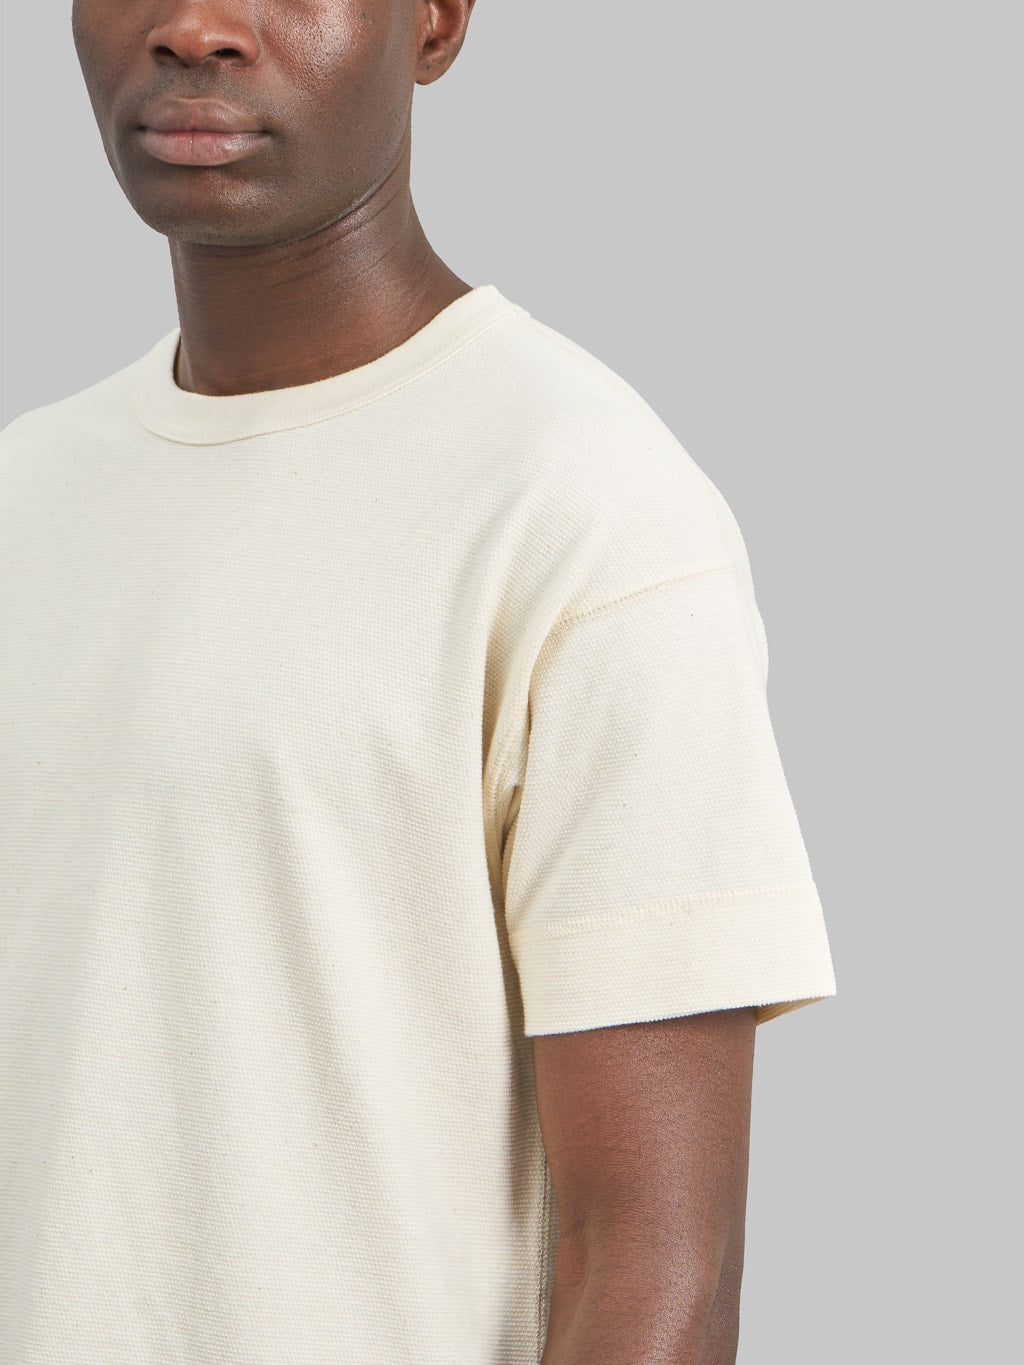 Trophy Clothing Utility Mil Tee natural  sleeve